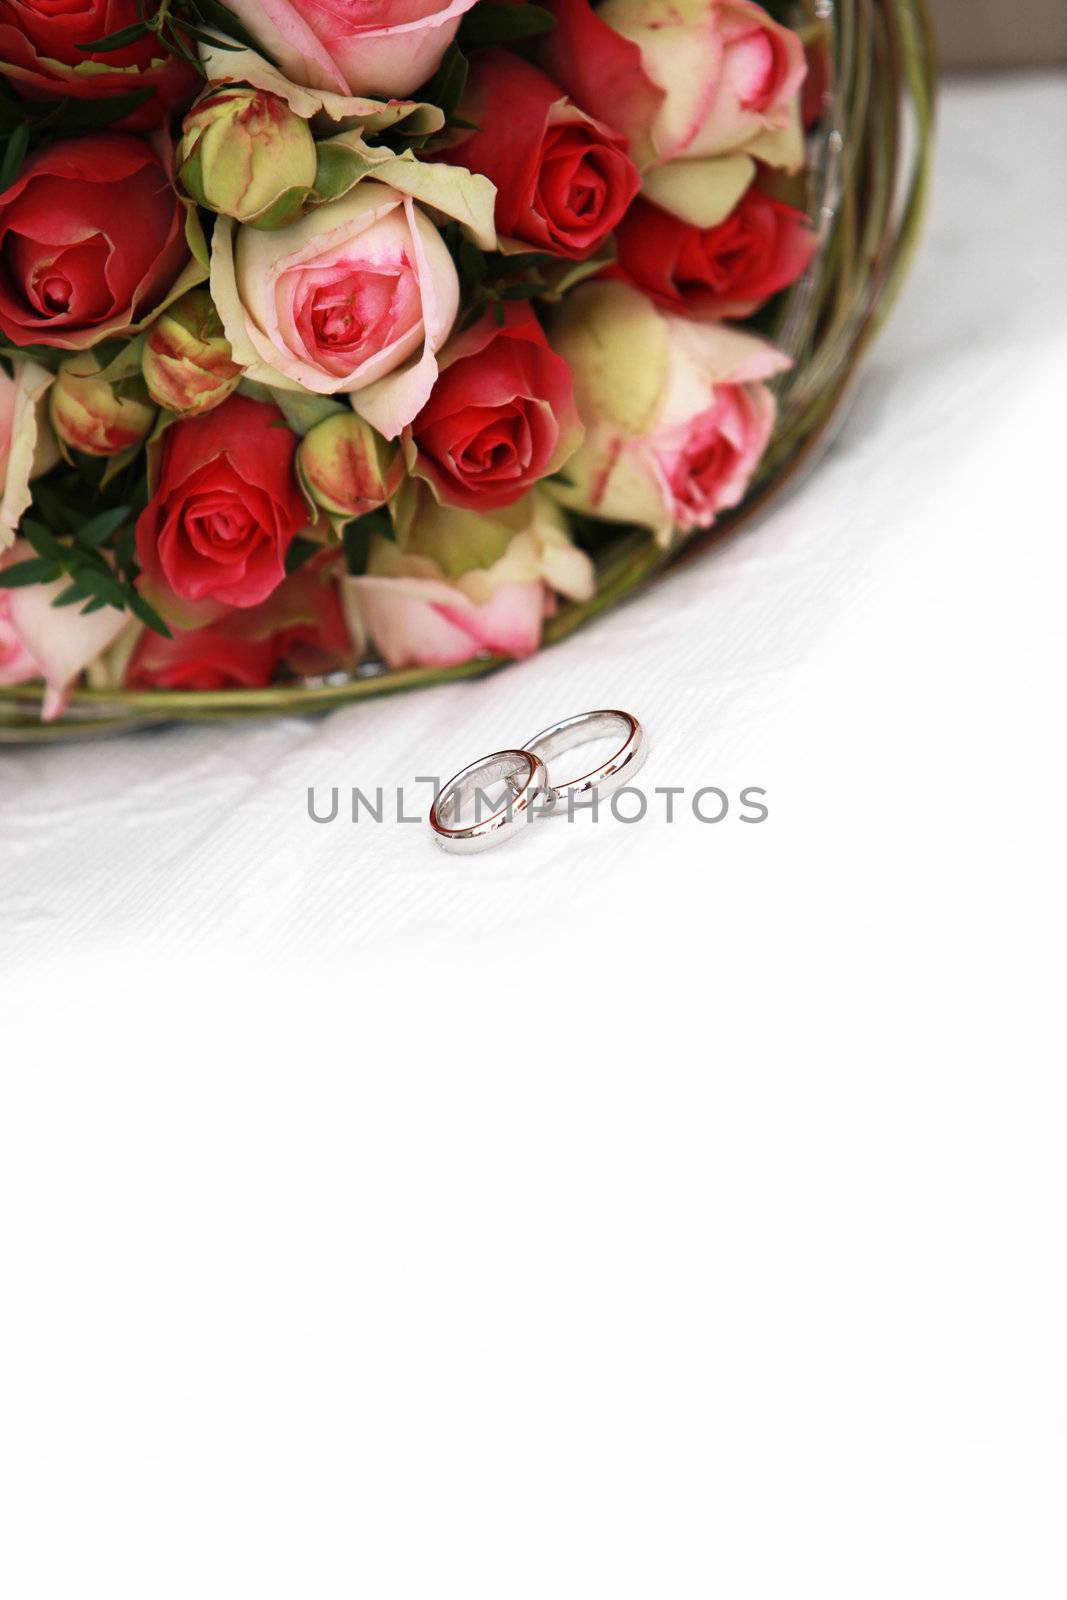 bridal bouquet with wedding rings by Farina6000